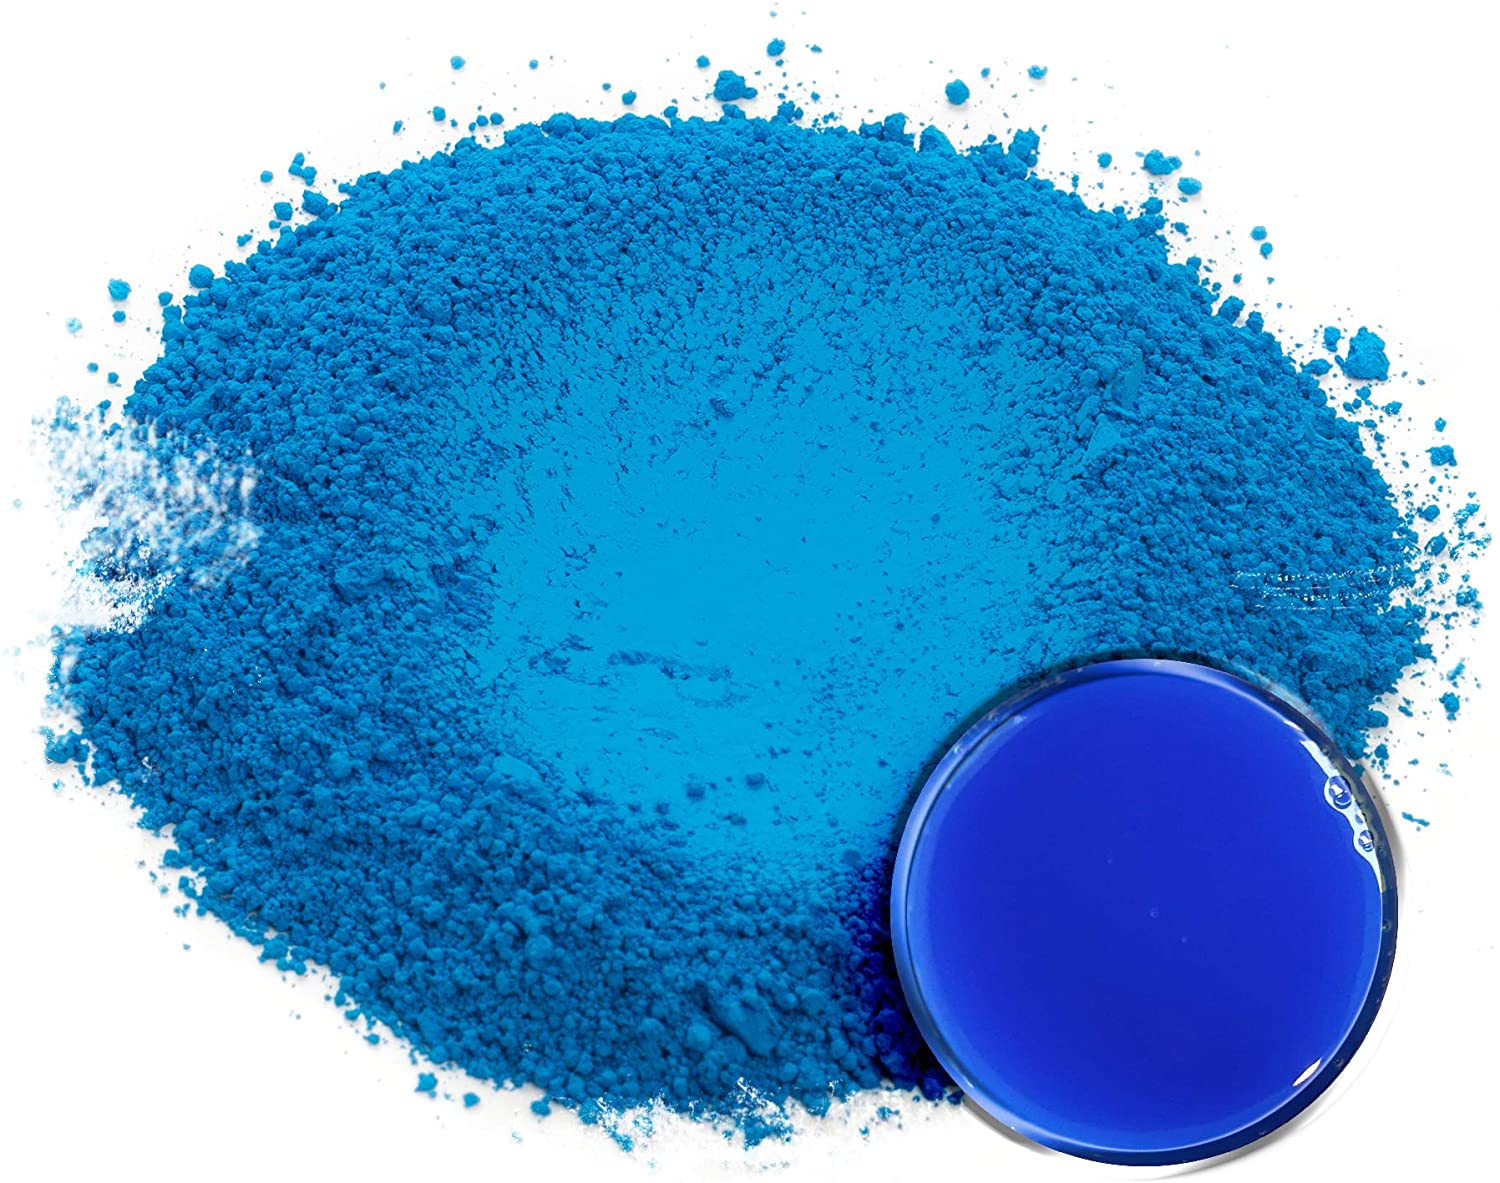 Eye Candy Mica Powder - Neon Pigment - Colorant for Epoxy - Resin -  Woodworking - Soap Molds - Candle Making - Slime - Bath Bombs - Nail Polish  - Cosmetic Grade - Non-Toxic (Electric Blue, 25 Grams) 